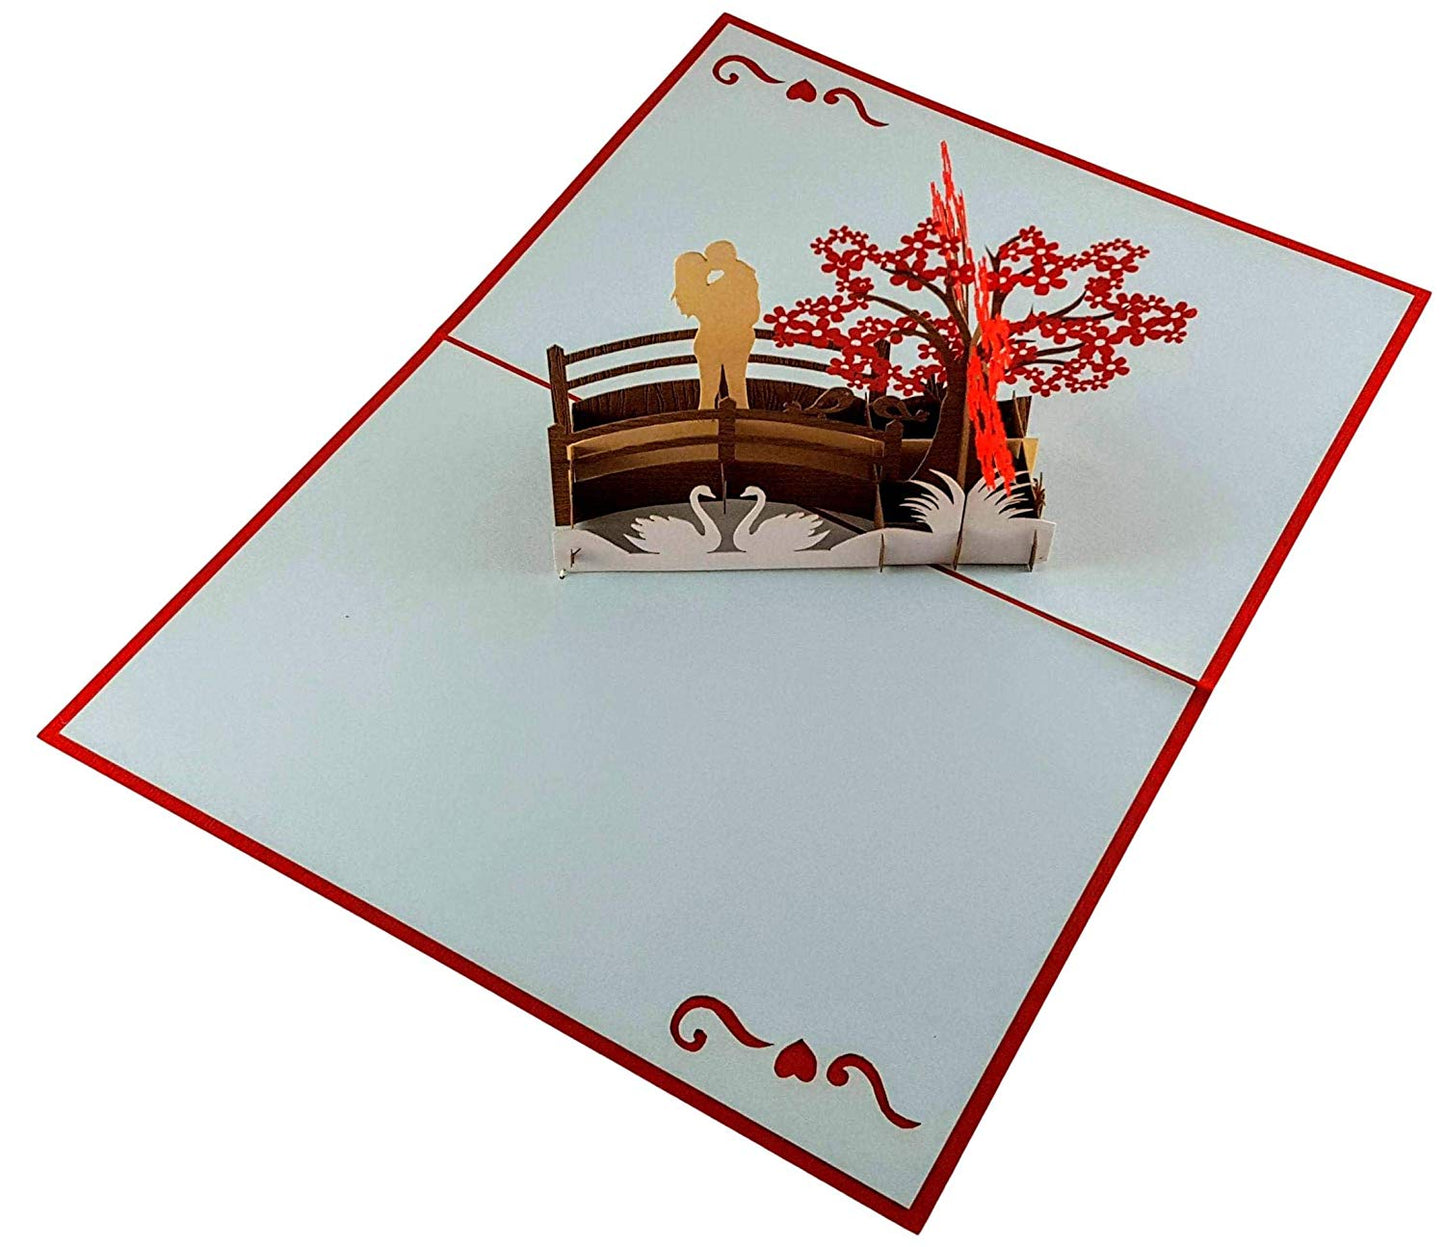 Happy Anniversary 3D Pop Up Greeting Card - Anniversary - Valentine's Day - iGifts And Cards